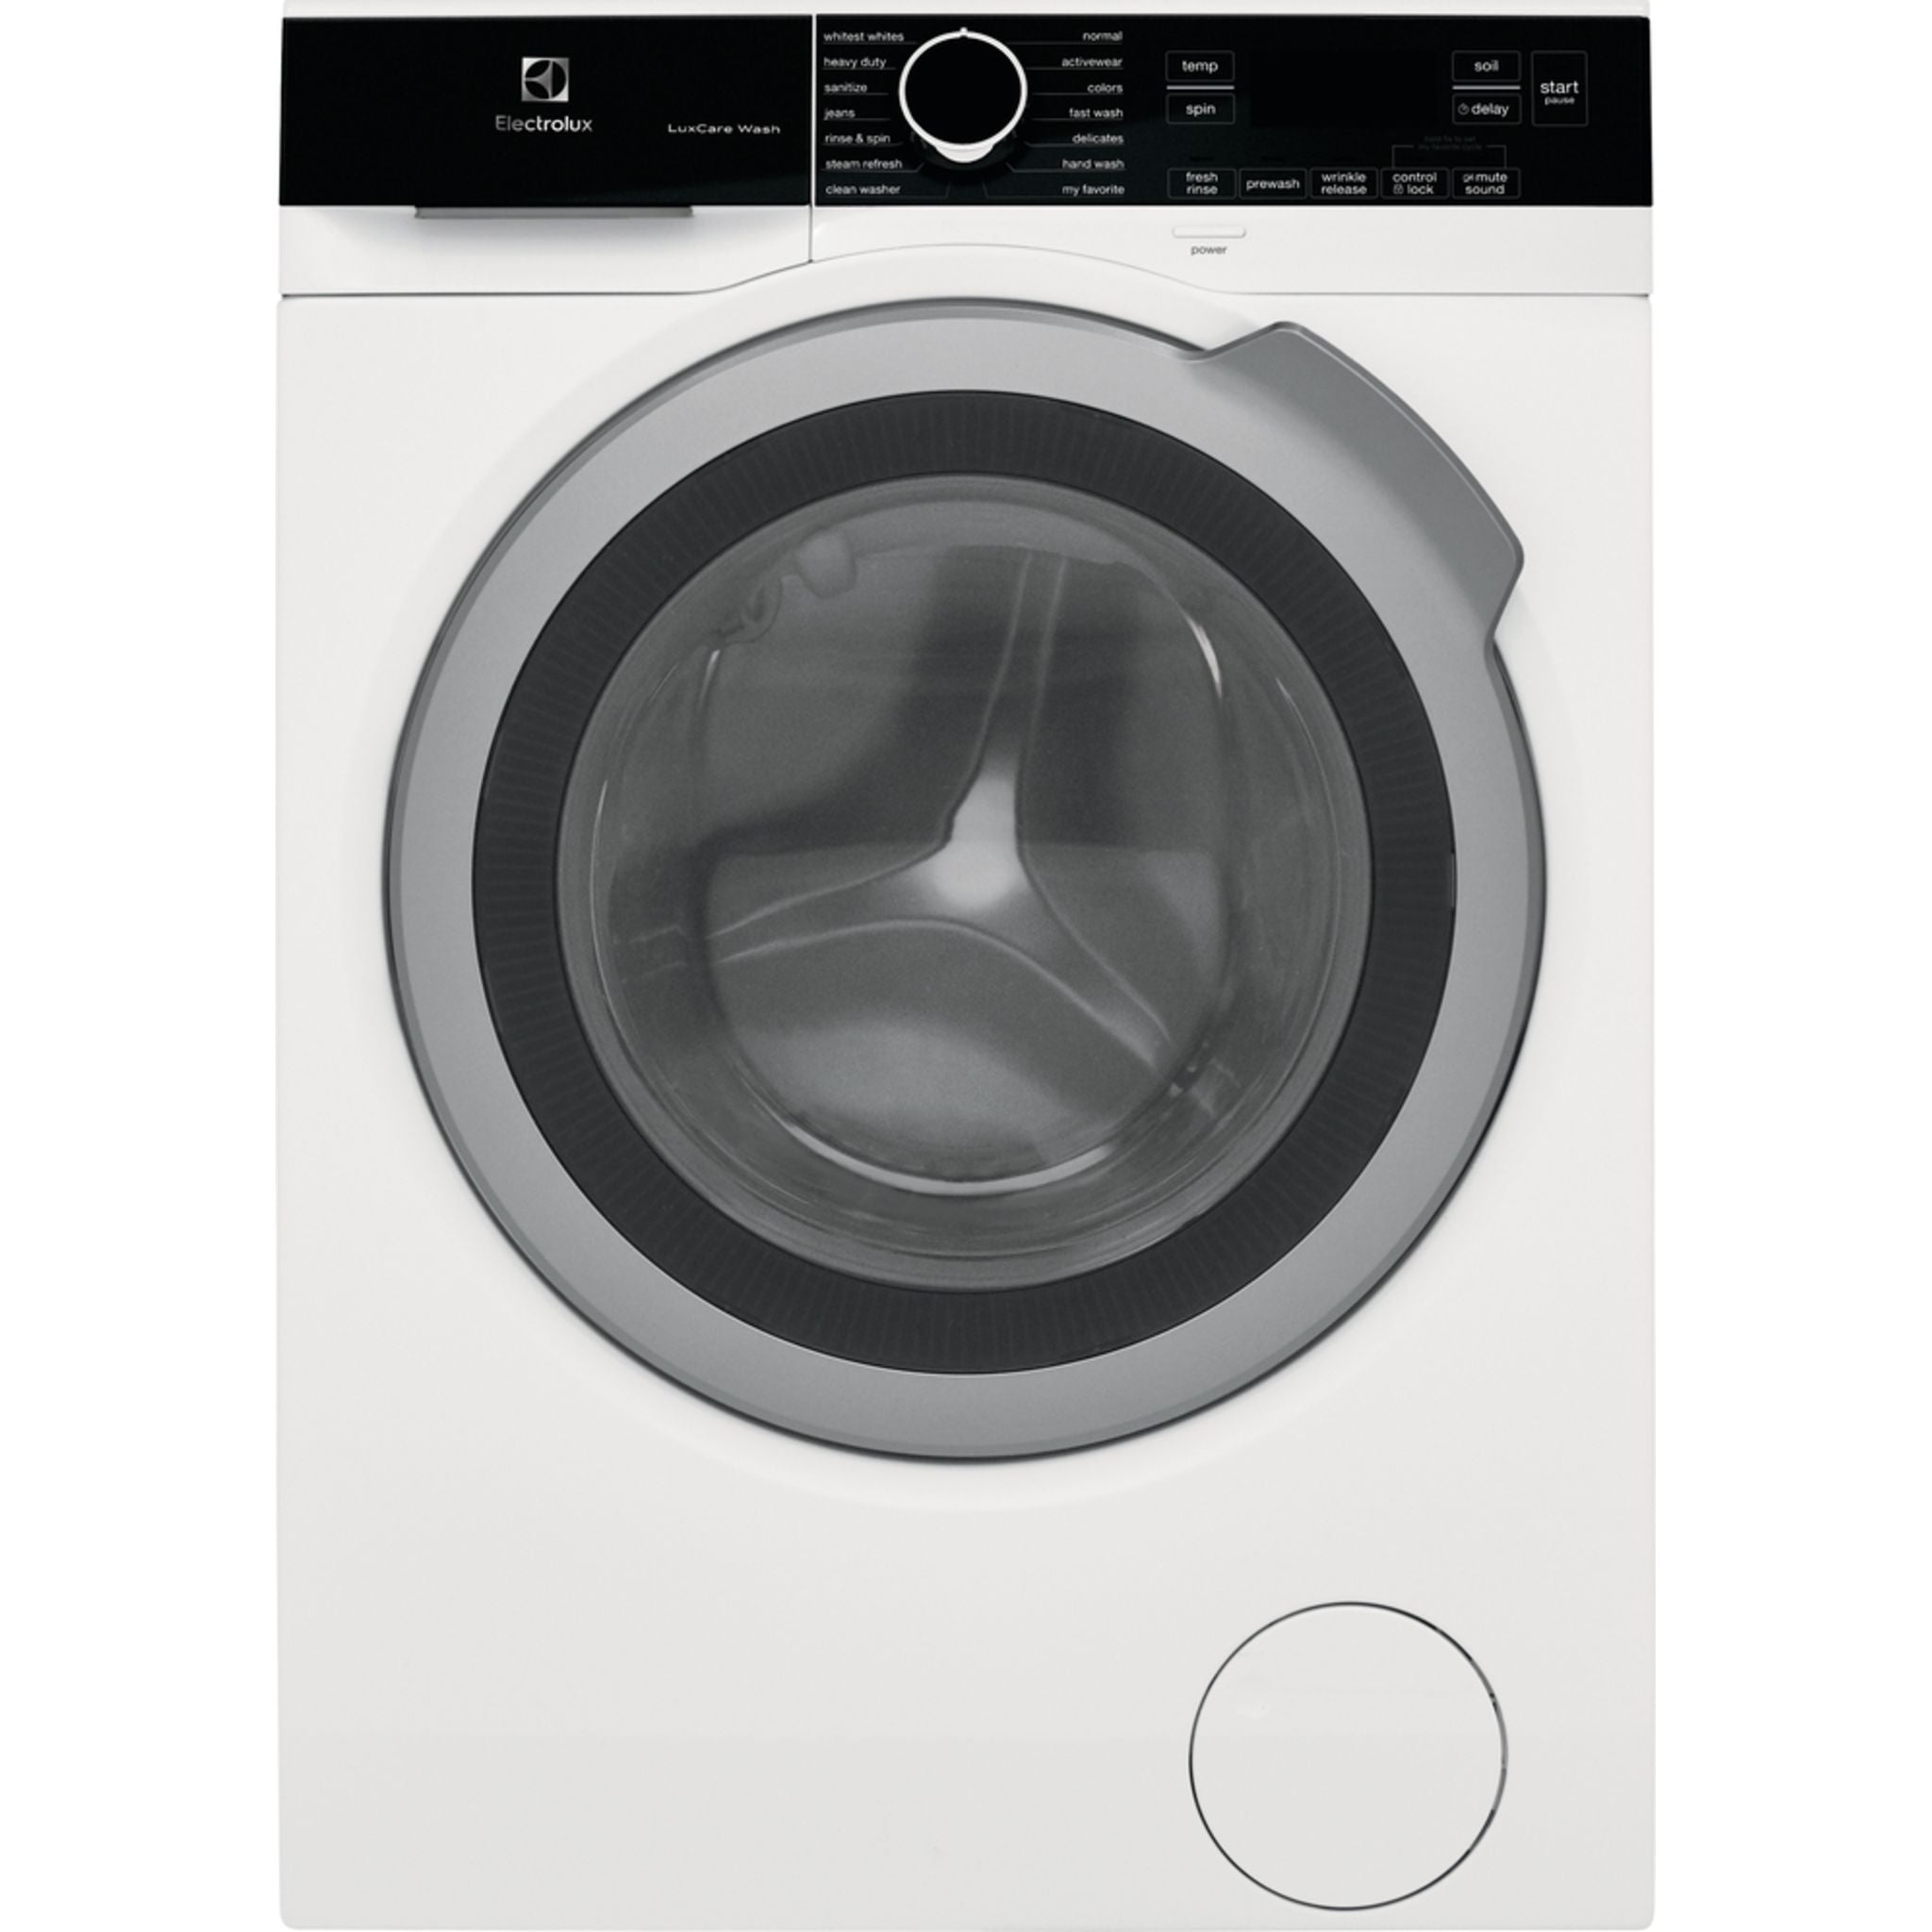 Electrolux Home Products, Electrolux Front Load Washer (ELFW4222AW) - White